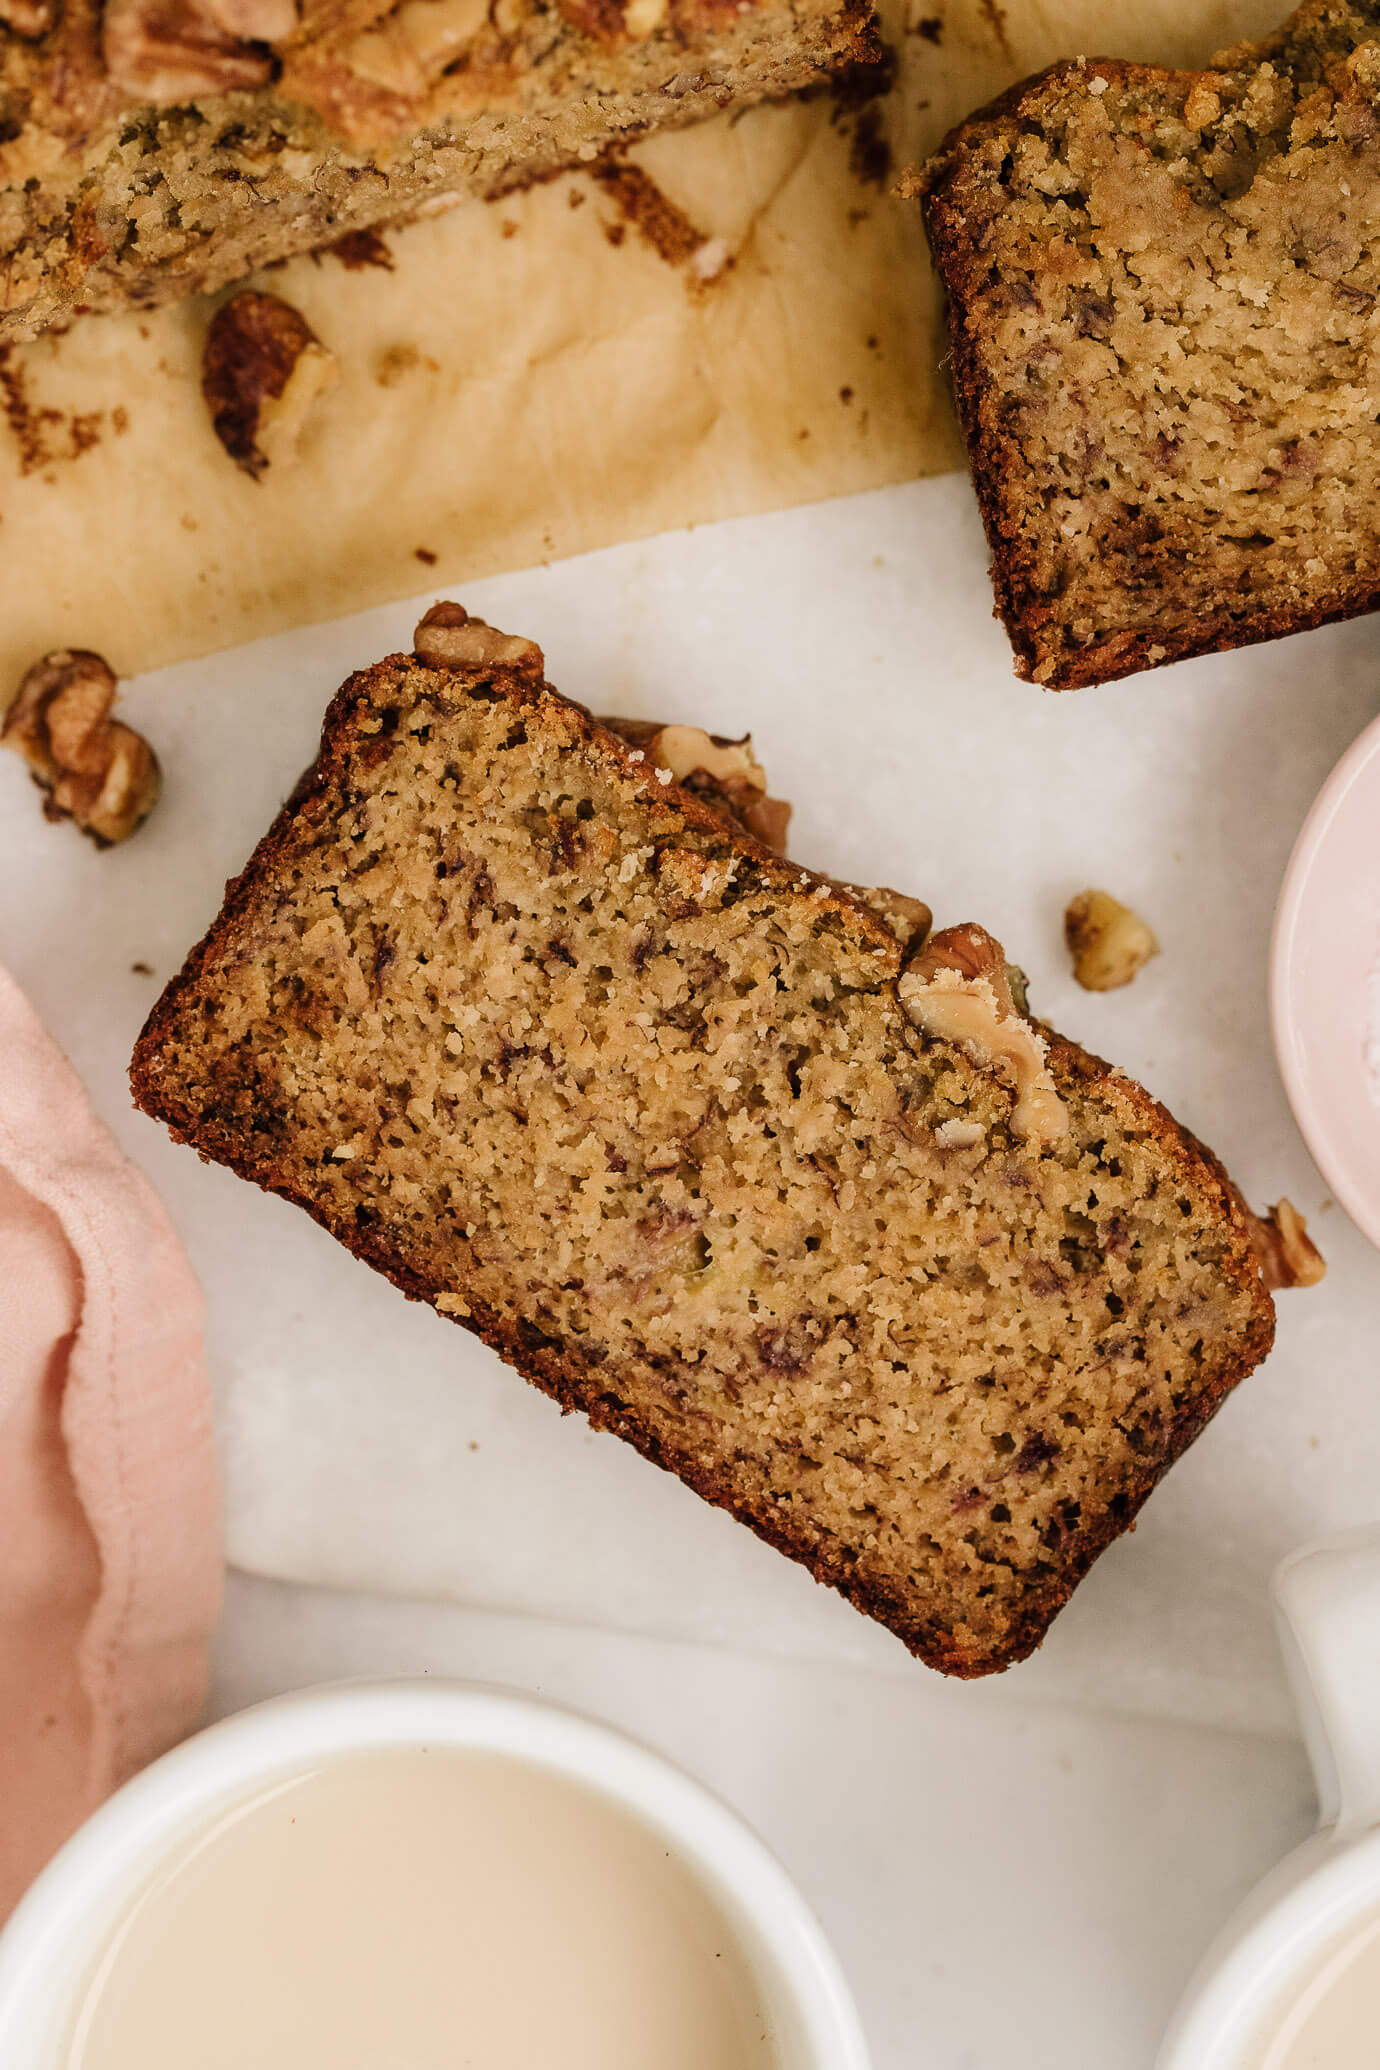 The best gluten-free banana bread made with almond flour and oat flour.